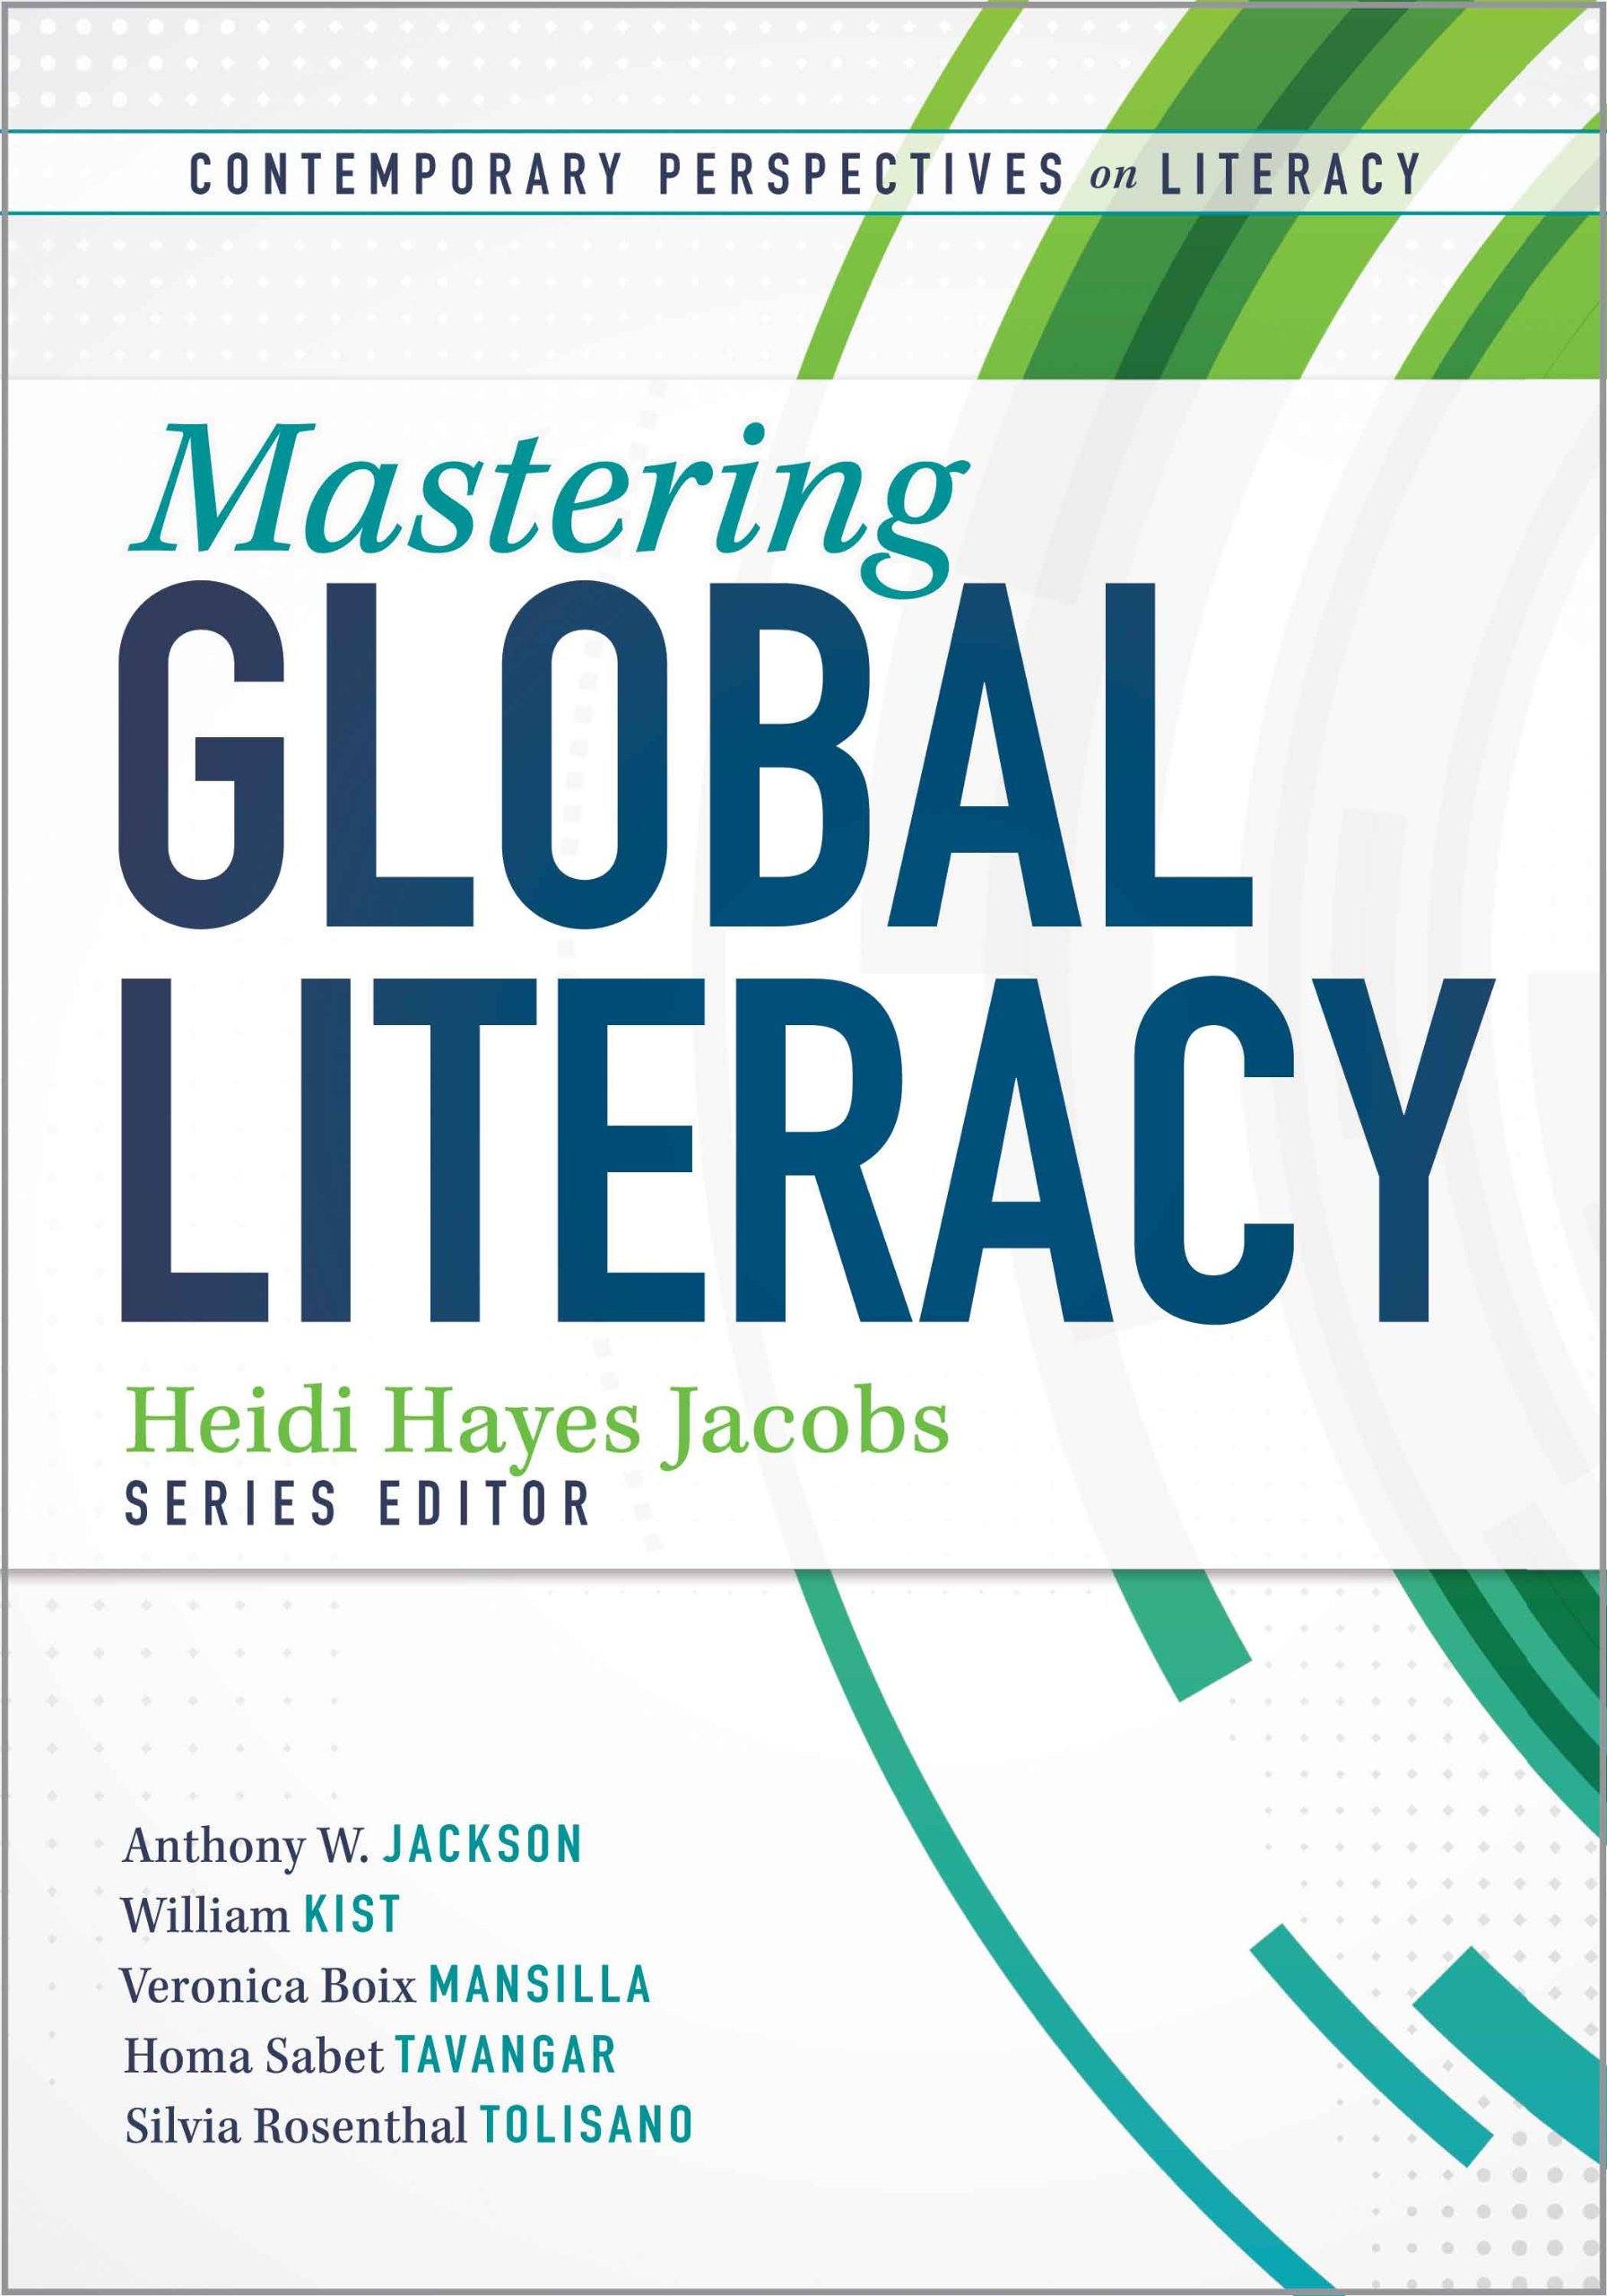 MASTERING GLOBAL LITERACY (CONTEMPORARY PERSPECTIVES ON LITERACY)